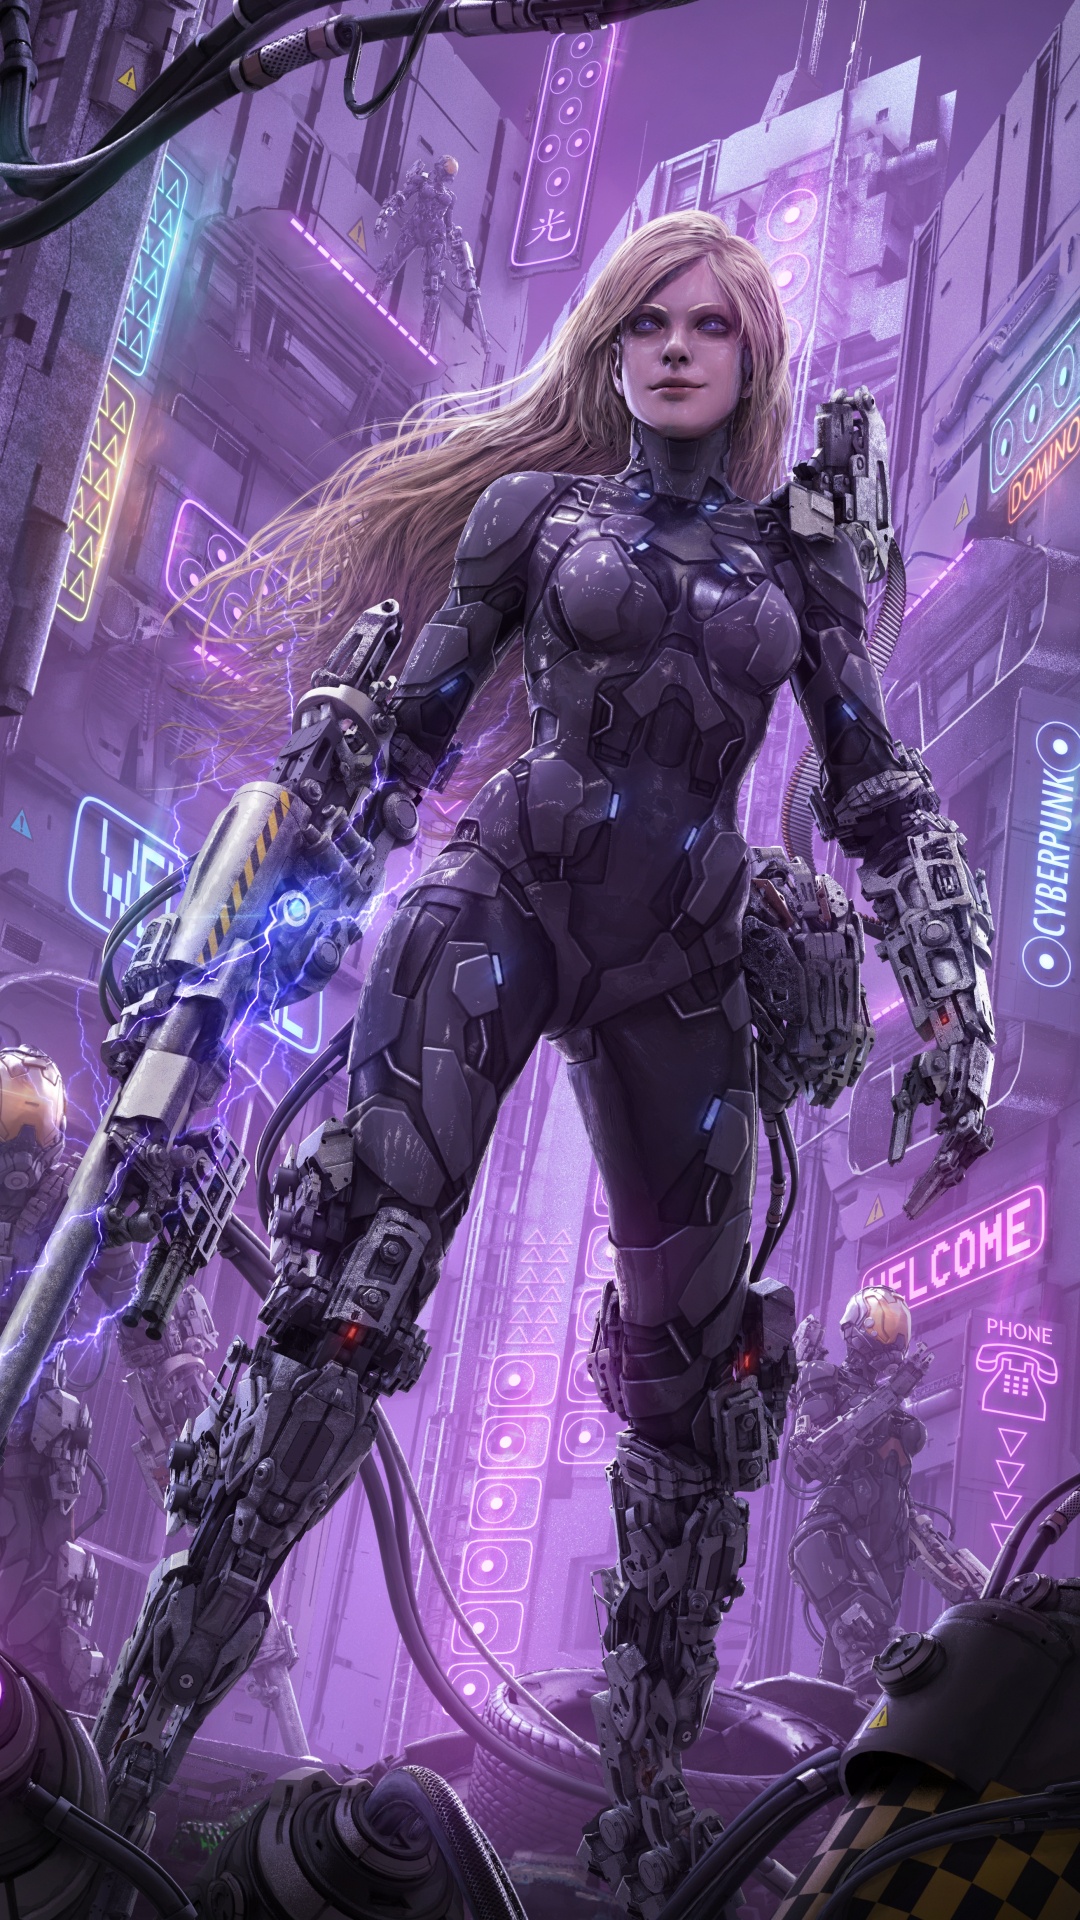 Cyberpunk, Science Fiction, Purple, pc Game, Games. Wallpaper in 1080x1920 Resolution